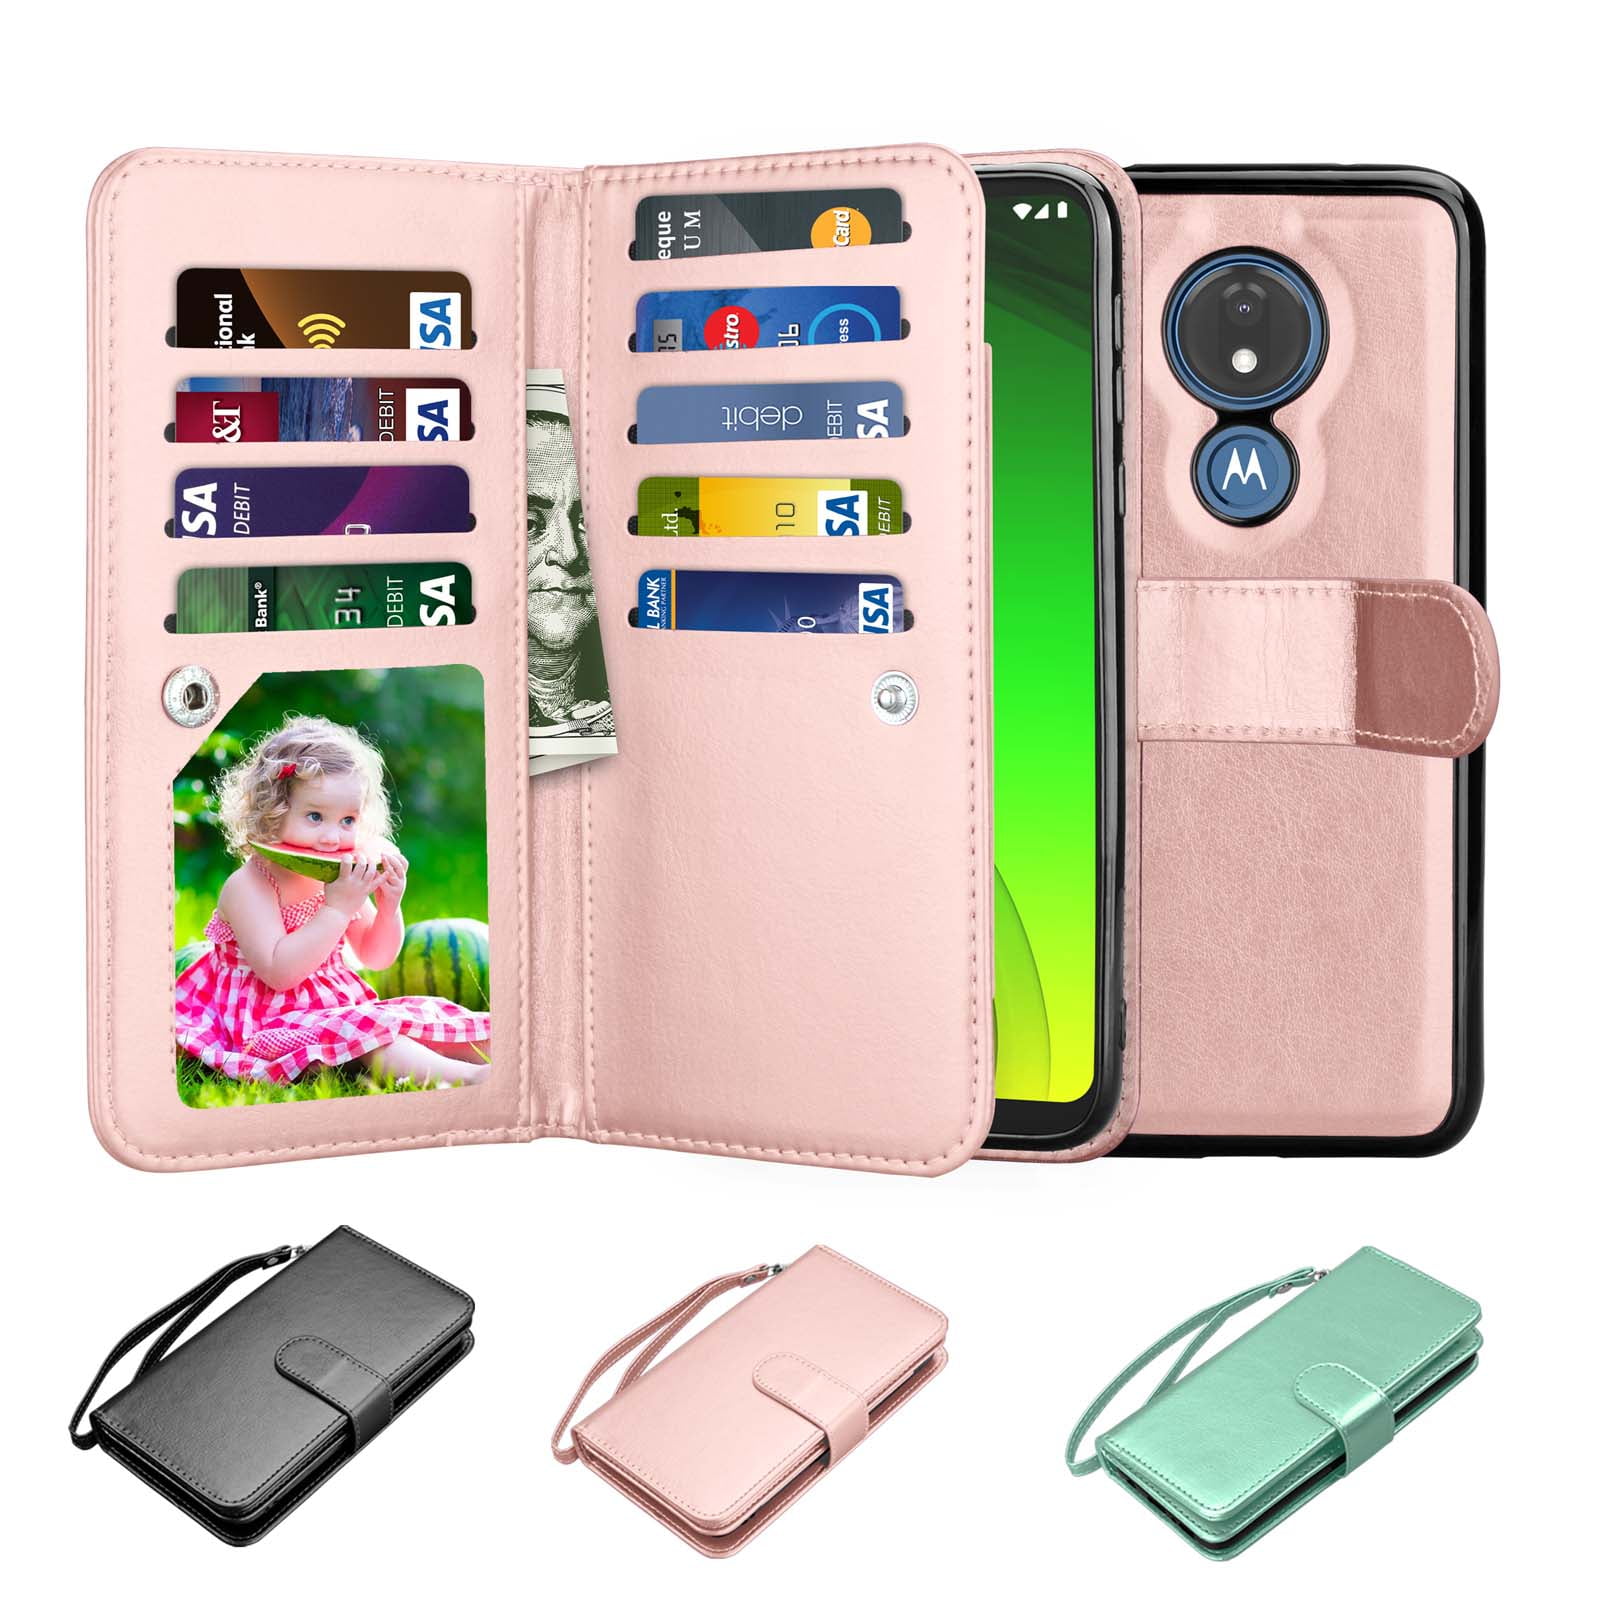 Moto G7 Power Case Pink Moto G7 Optimo Maxx Case, STARSHOP- Premium Leather Wallet Pocket Cover And Credit Card Slots NOT FIT Moto G7 / Play / G7 Optimo With Tempered Glass Screen Protector 